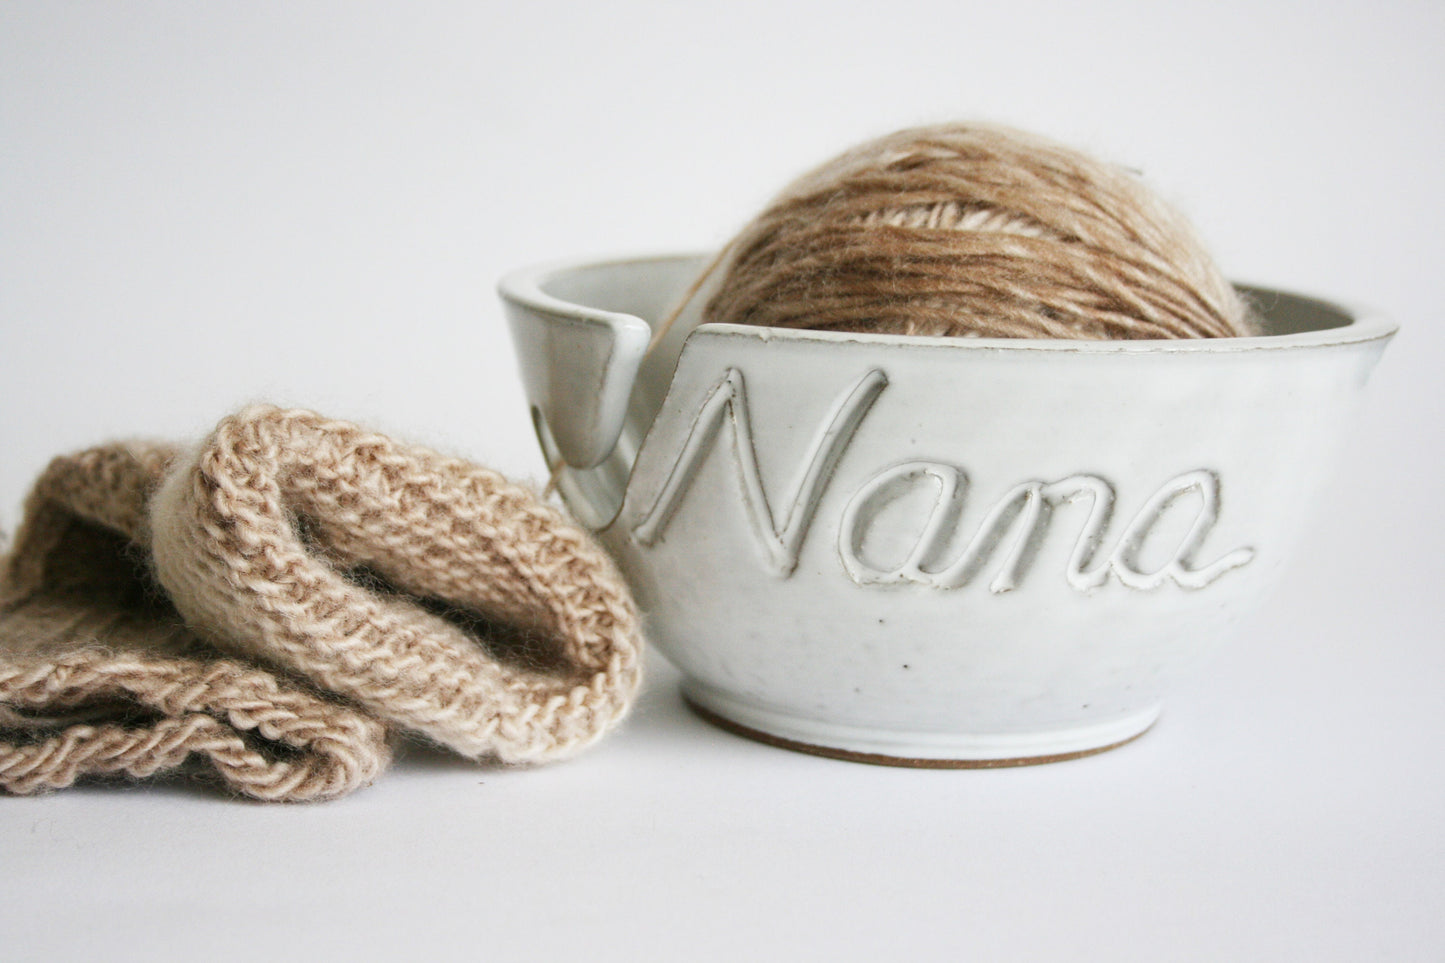 Personalized Custom Print Name Yarn Bowl Butter Yellow Crochet Customized Ceramic Pottery Holder Knit Gifts for Knitting Bag MADE TO ORDER